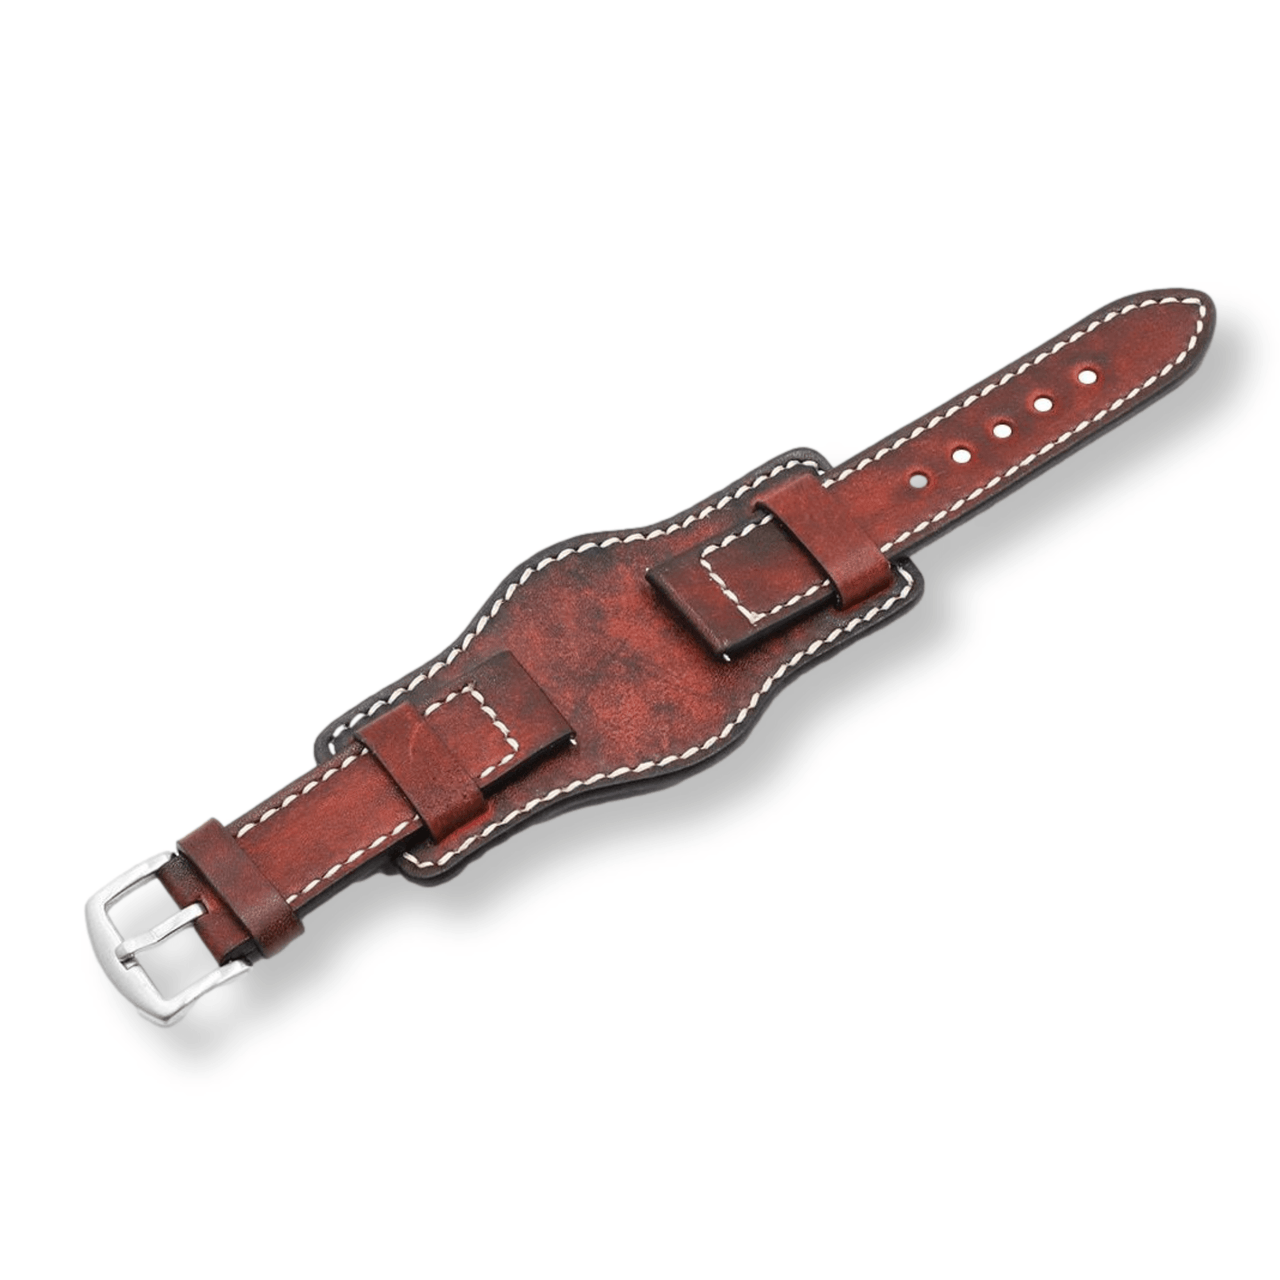 Colorful Leather Cuff Watch Bracelet - watchband.direct